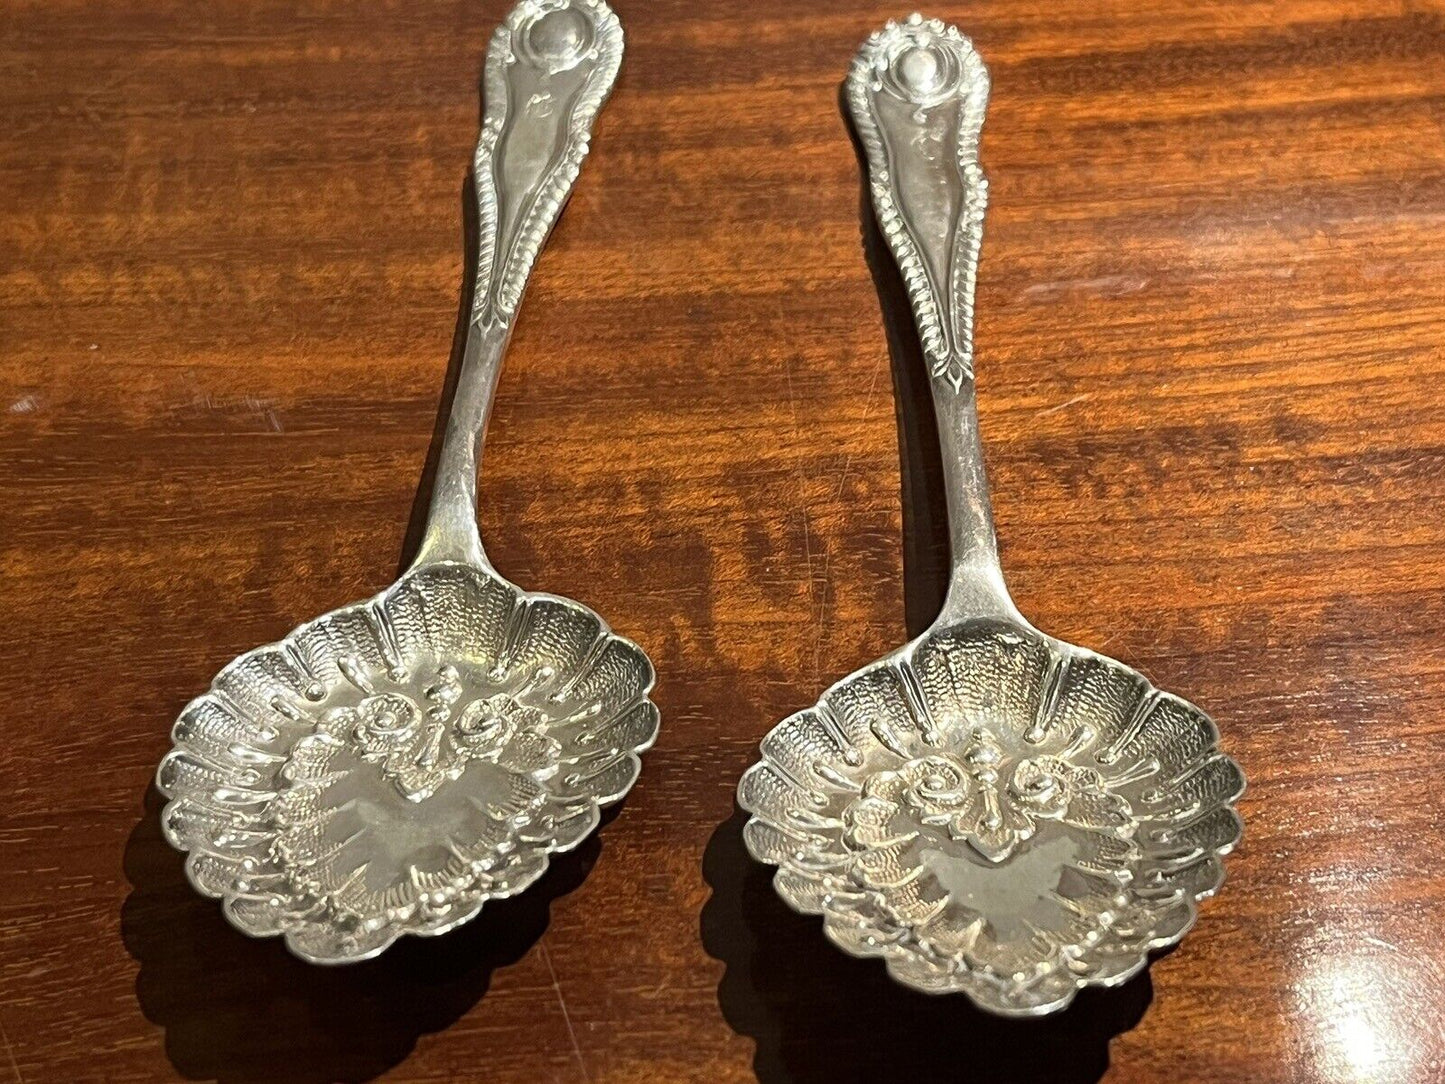 English Hallmarked Silver Repousse Fruit Serving Spoons